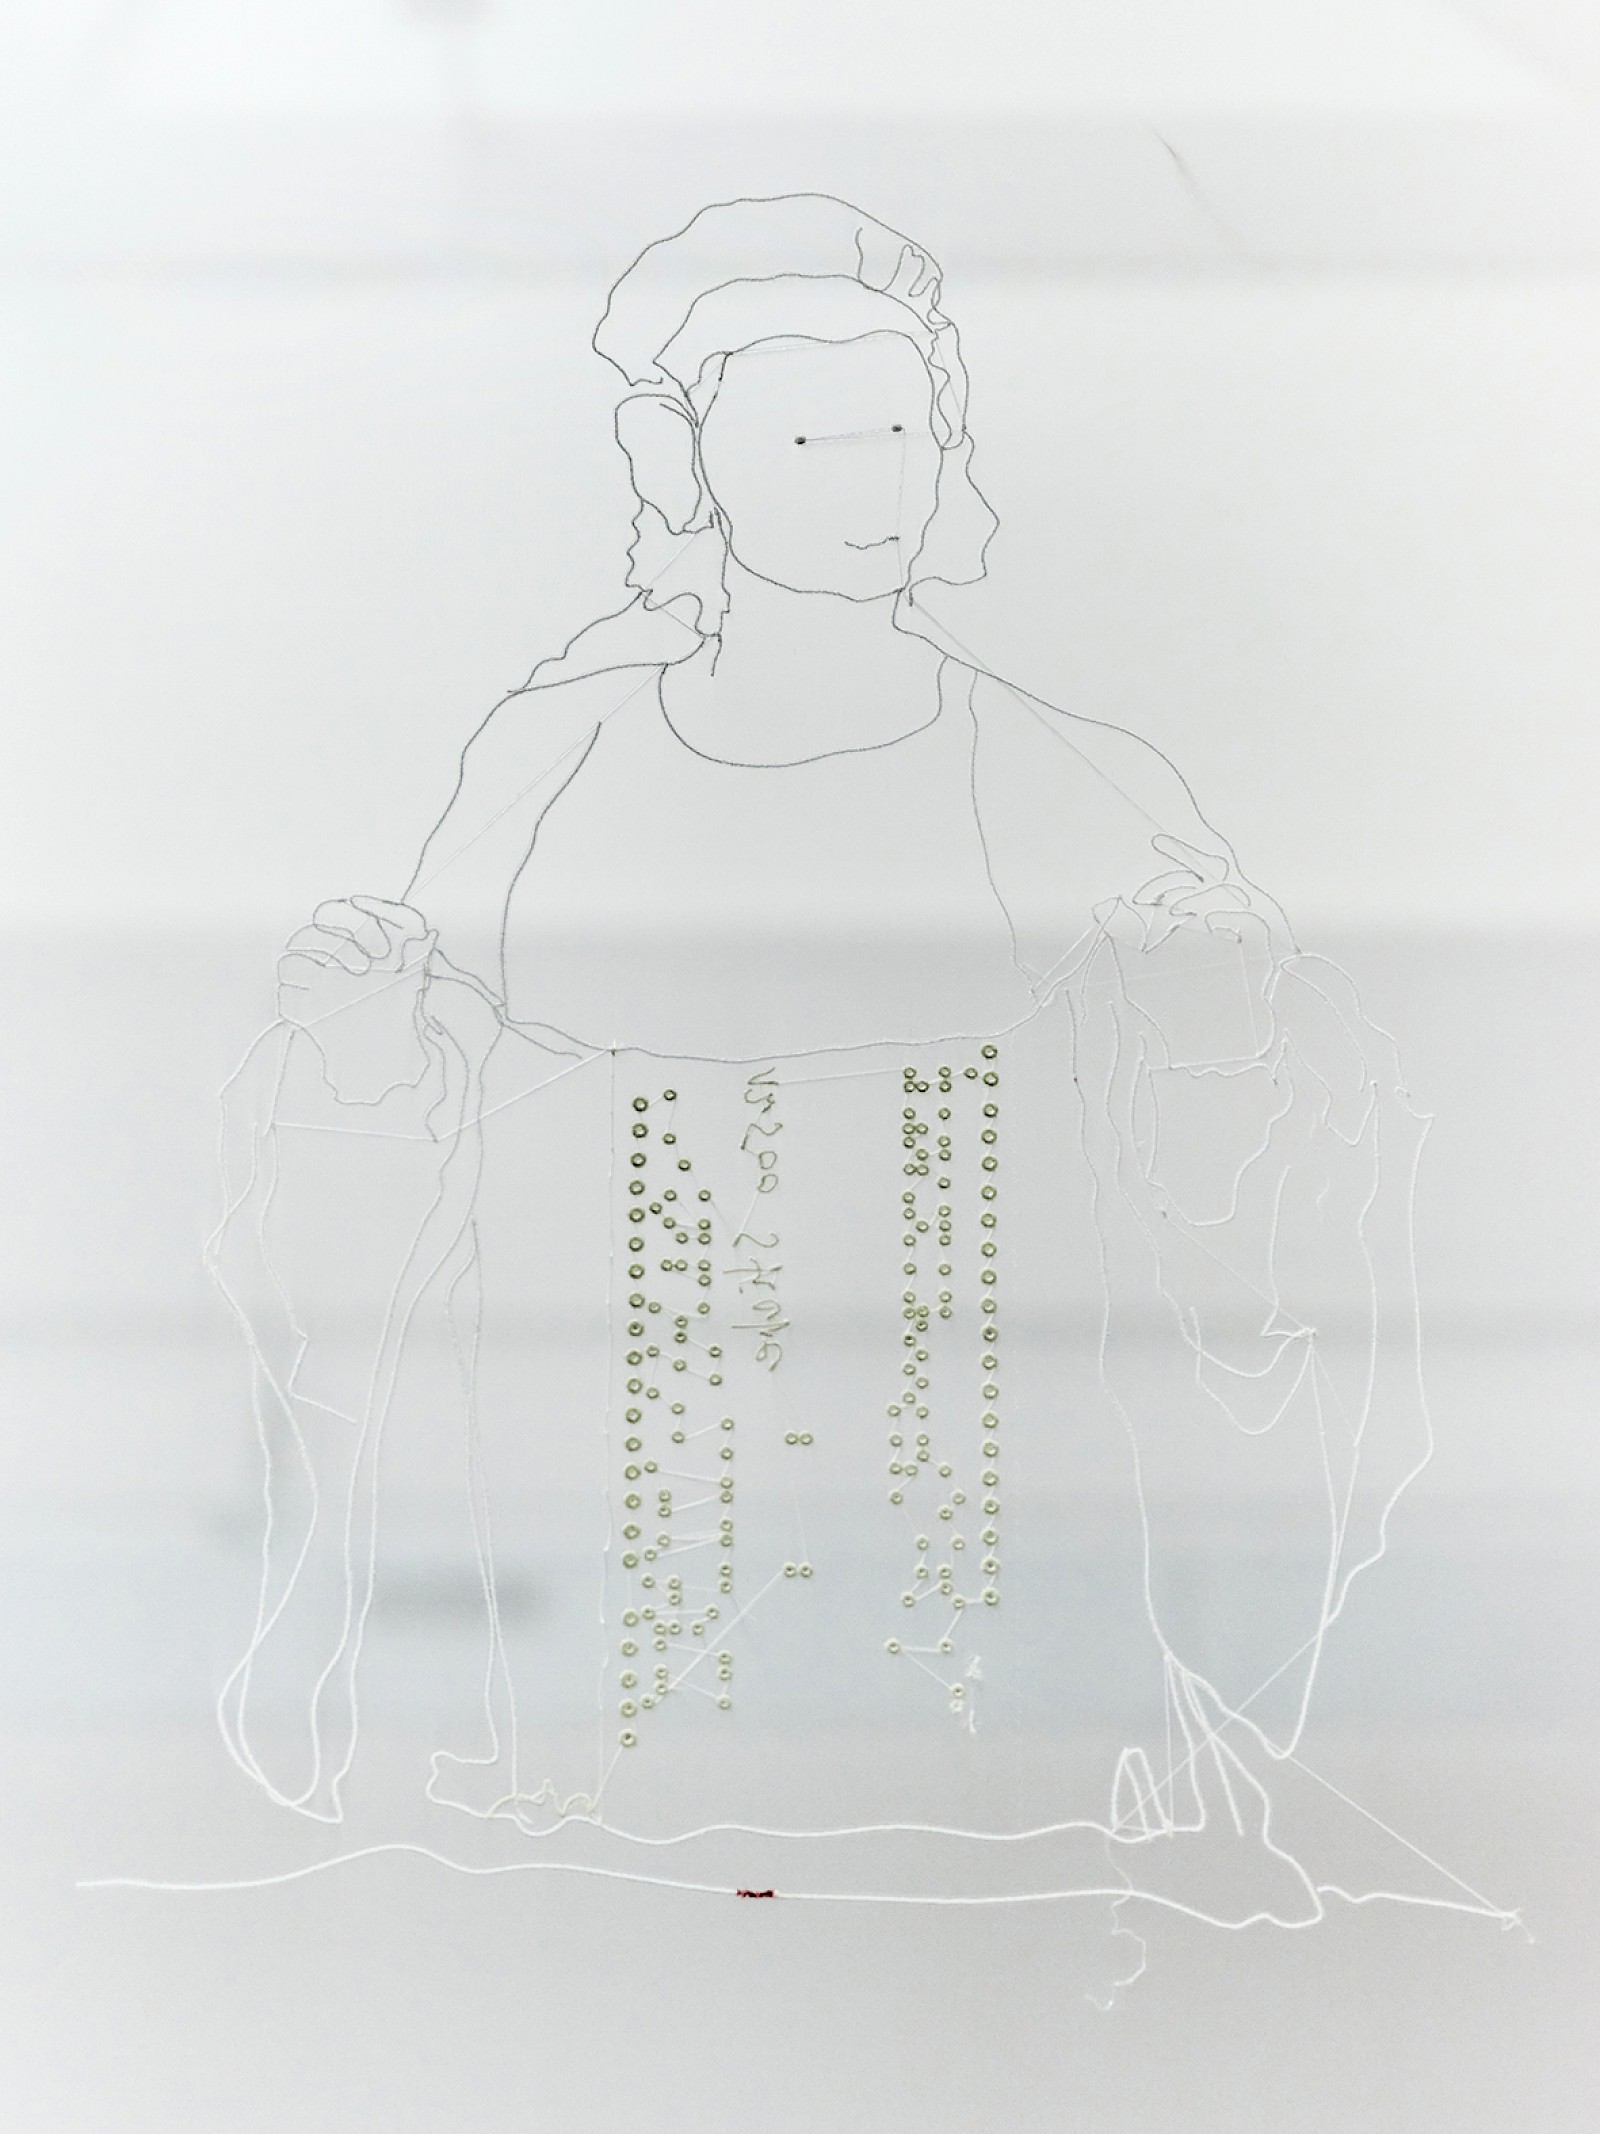 Image - Embroidery, Clotho holding a punched card with 12’500 stitches